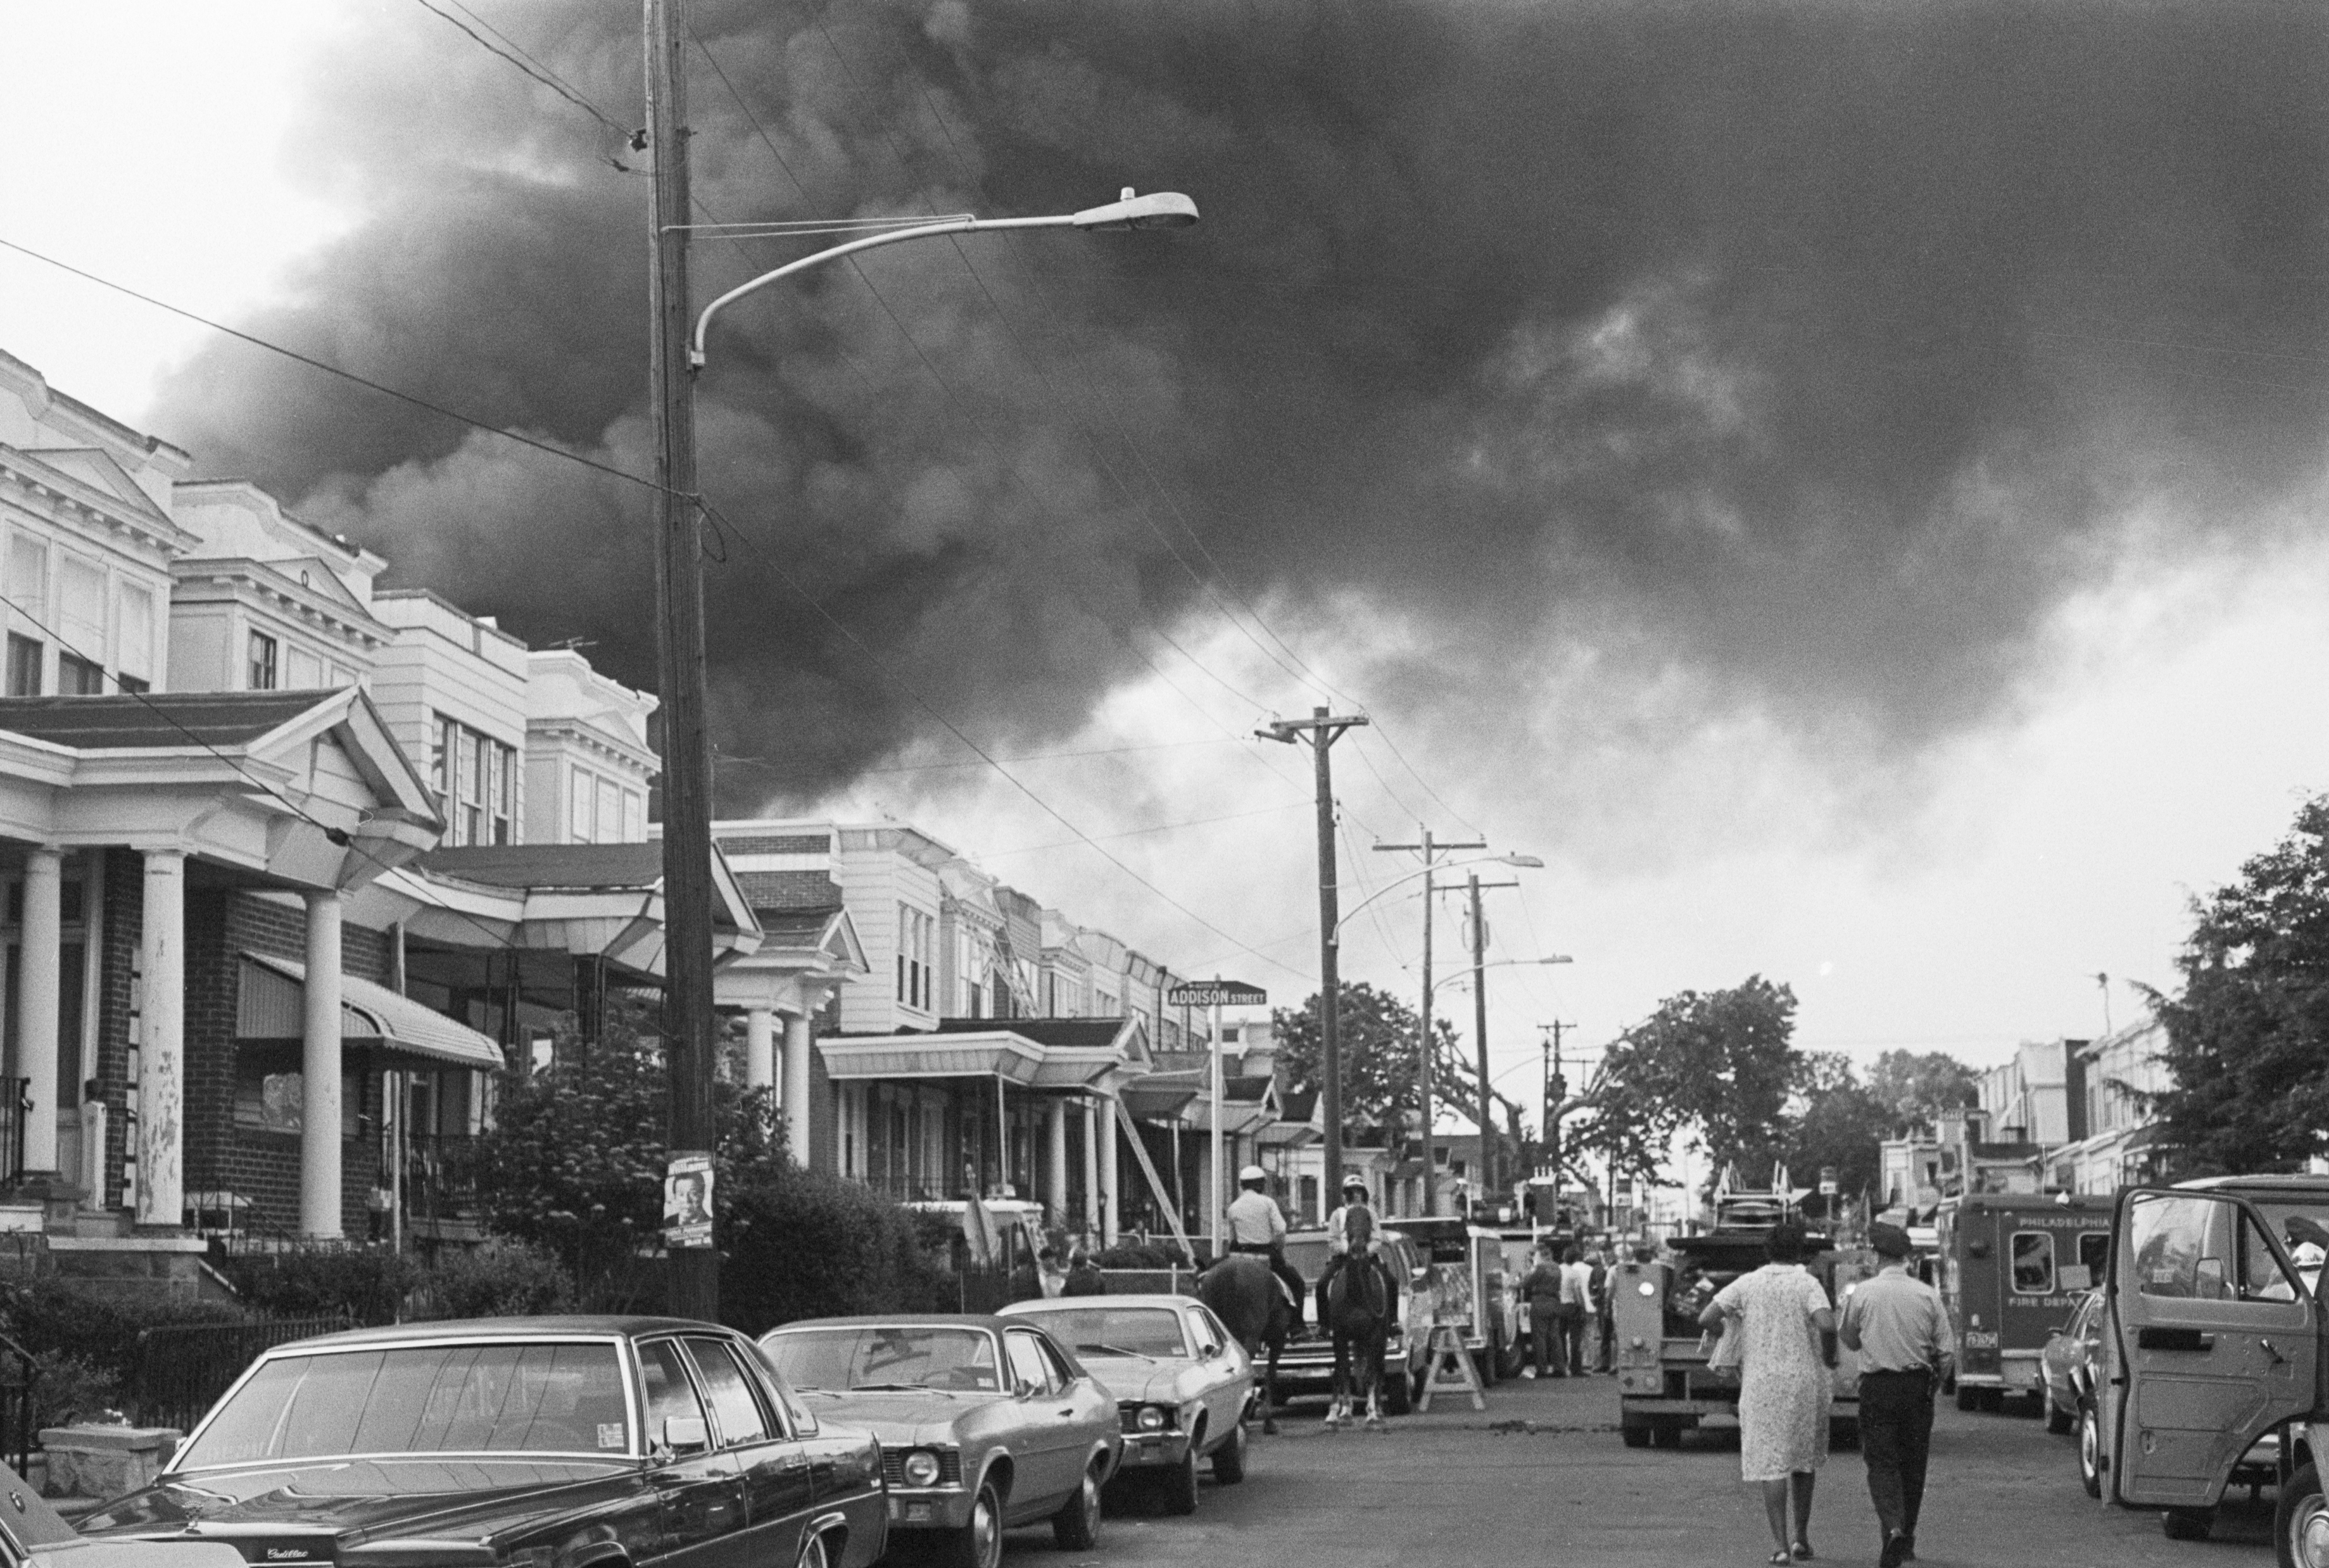 Smoke billows over rowhouses in West Philadelphia on May 12, 1985 after the police bombed a residence home to members of the Black liberation group MOVE. Police on horseback and emergency vehicles block off a street as residents walk towards the scene. (Bettmann Archive—Getty Images)